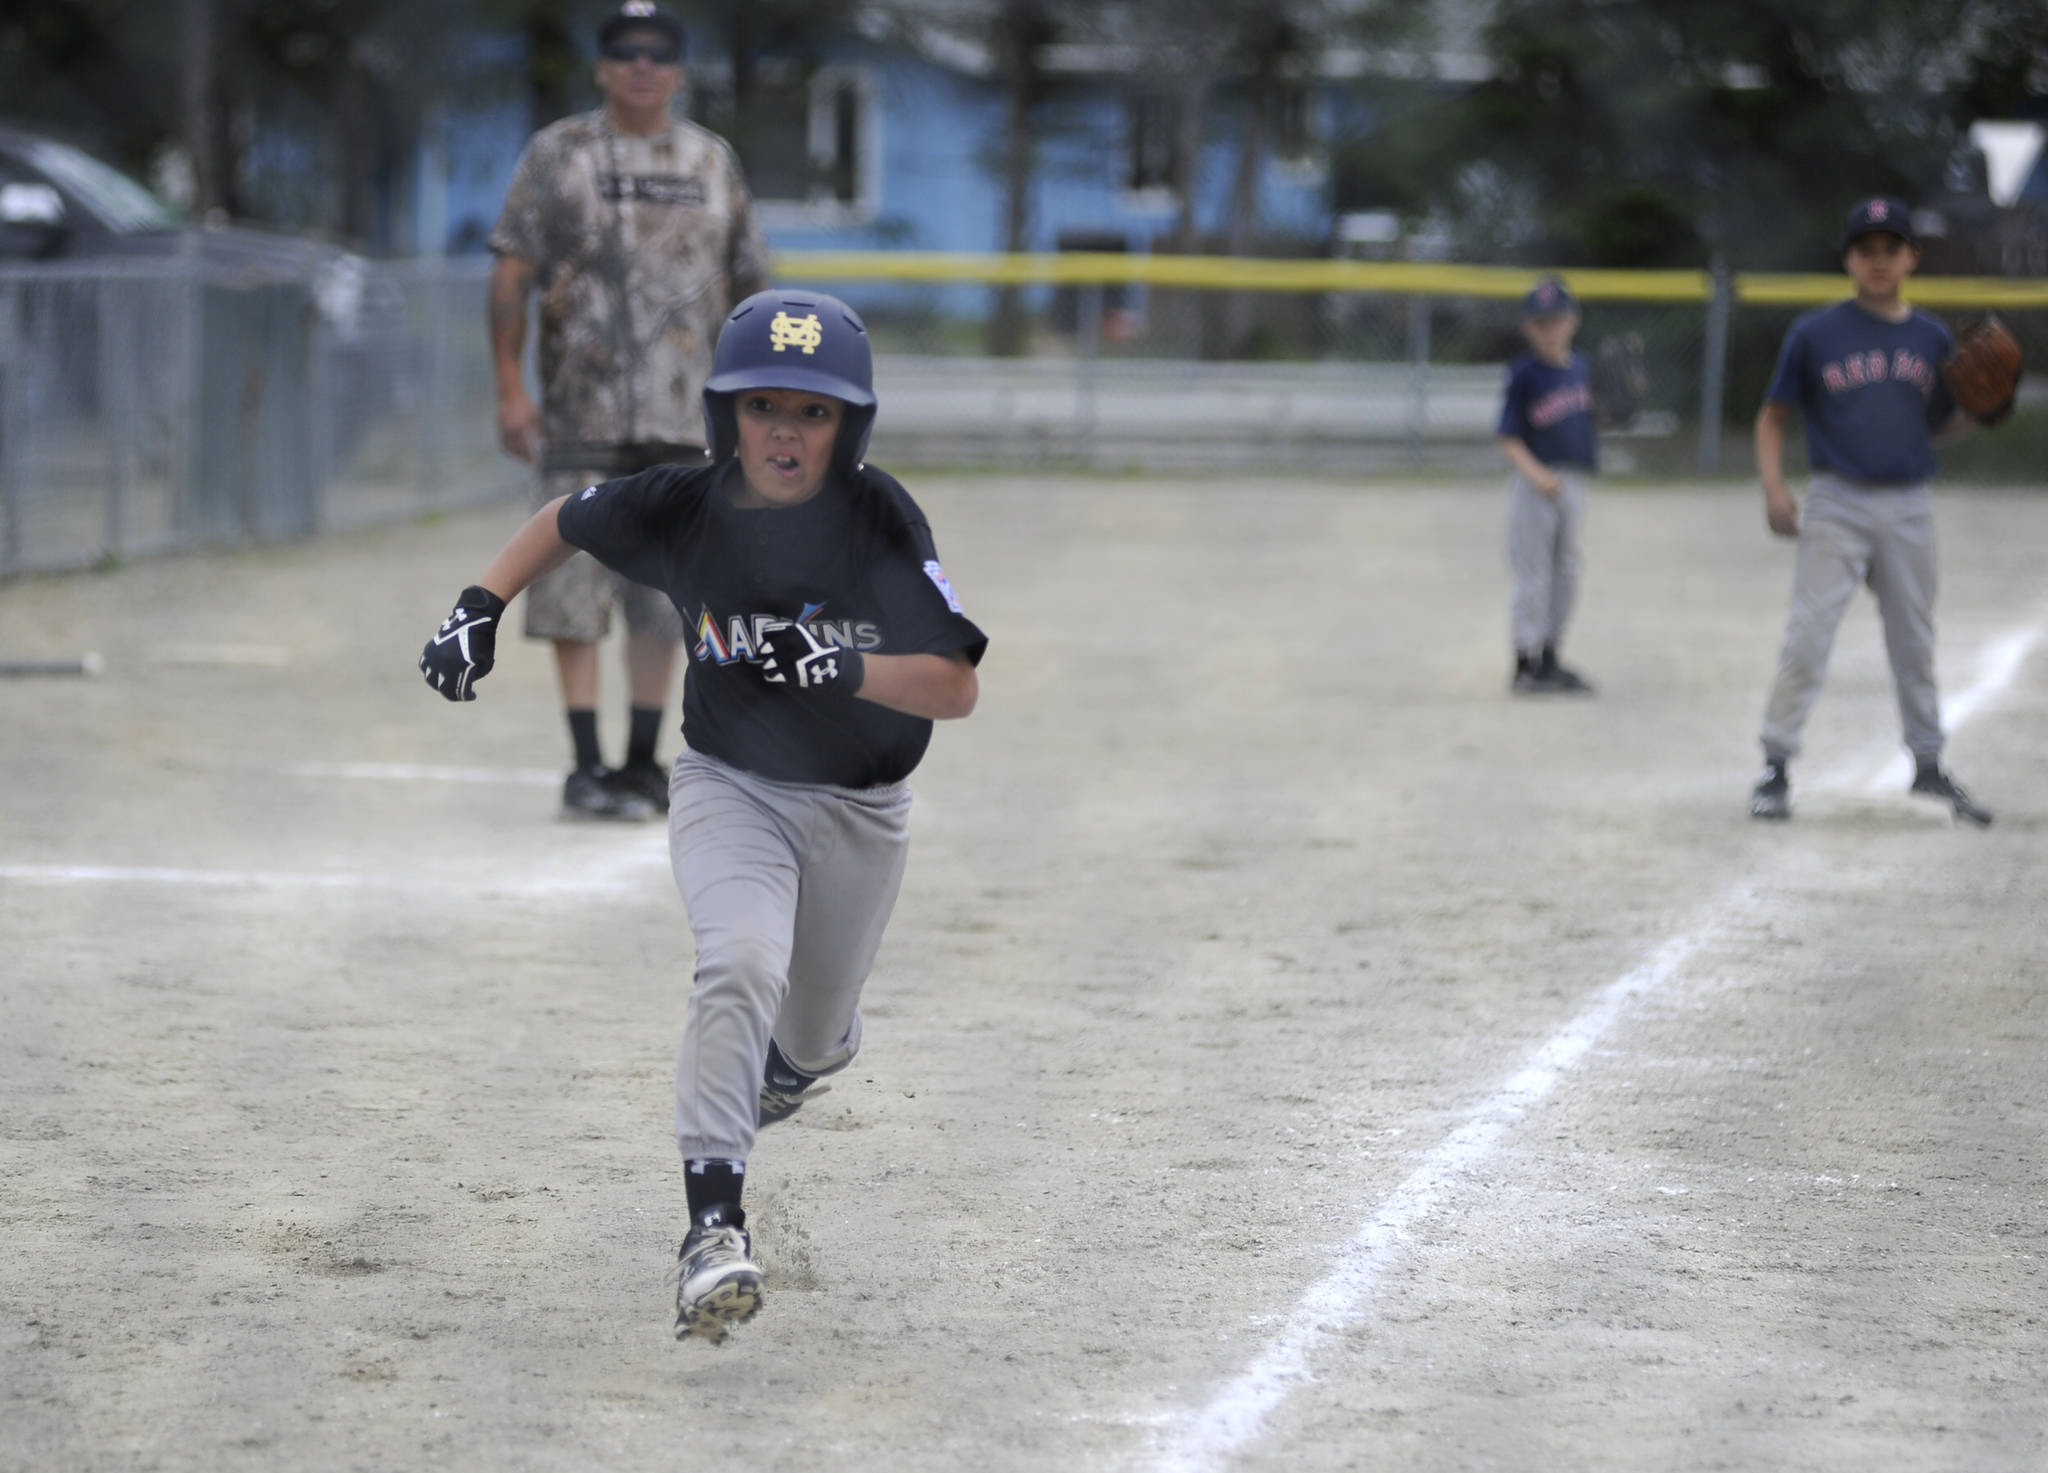 Marlins player Nilsen Nelson watches the ball as he comes home to score in the Gastineau Channel Little League Minor Division Championship game on Saturday at Miller Field. (Nolin Ainsworth | Juneau Empire)